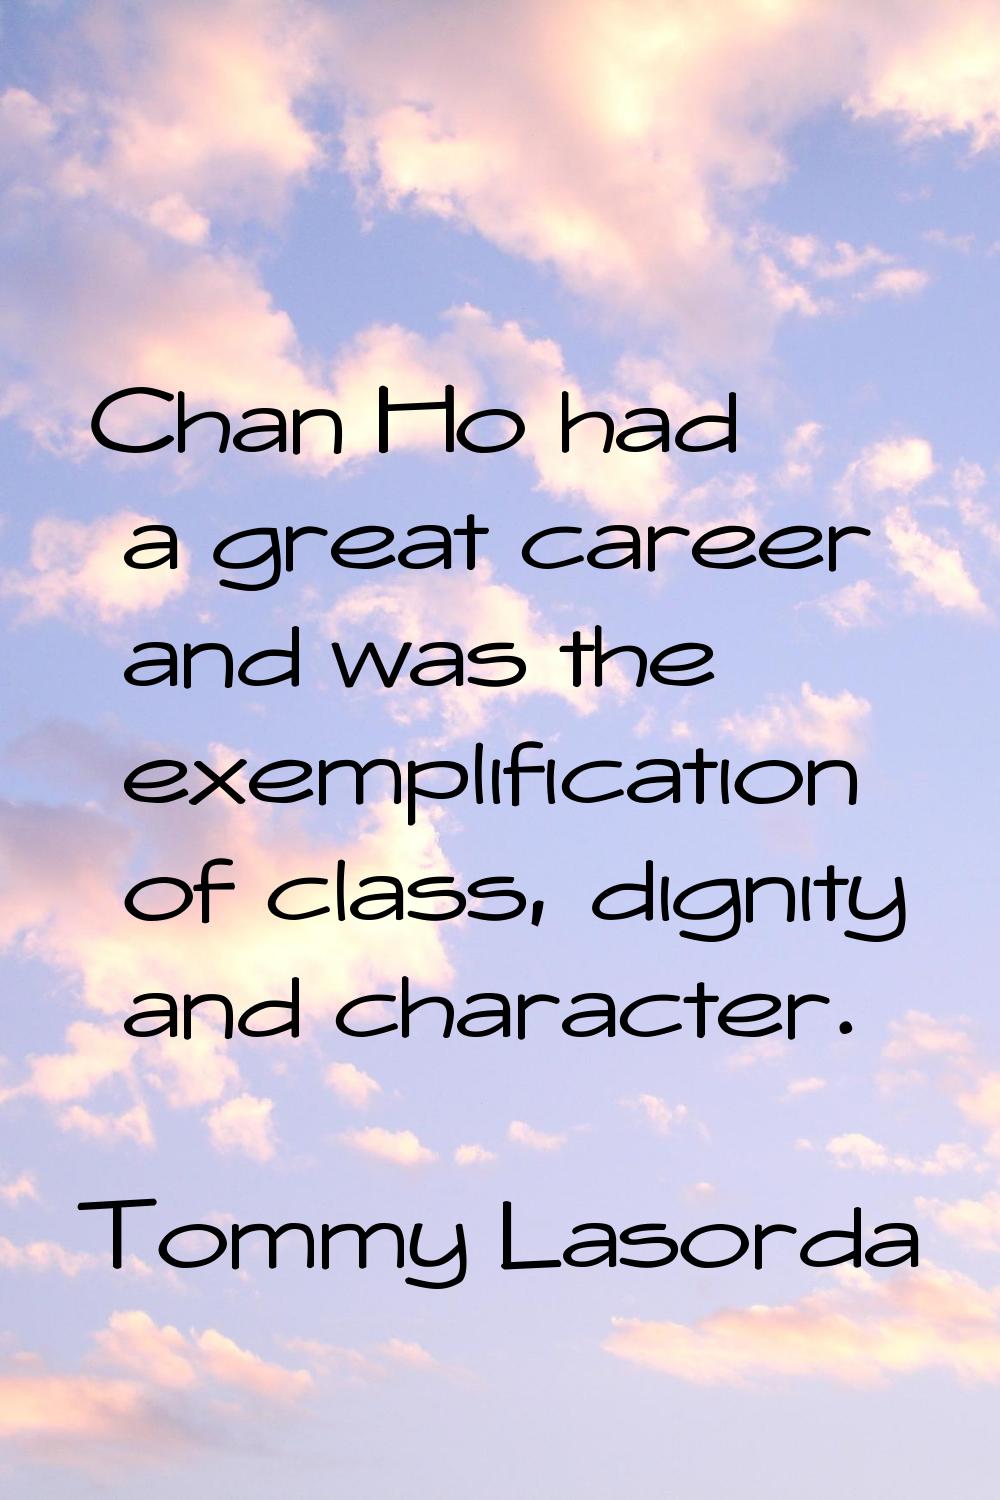 Chan Ho had a great career and was the exemplification of class, dignity and character.